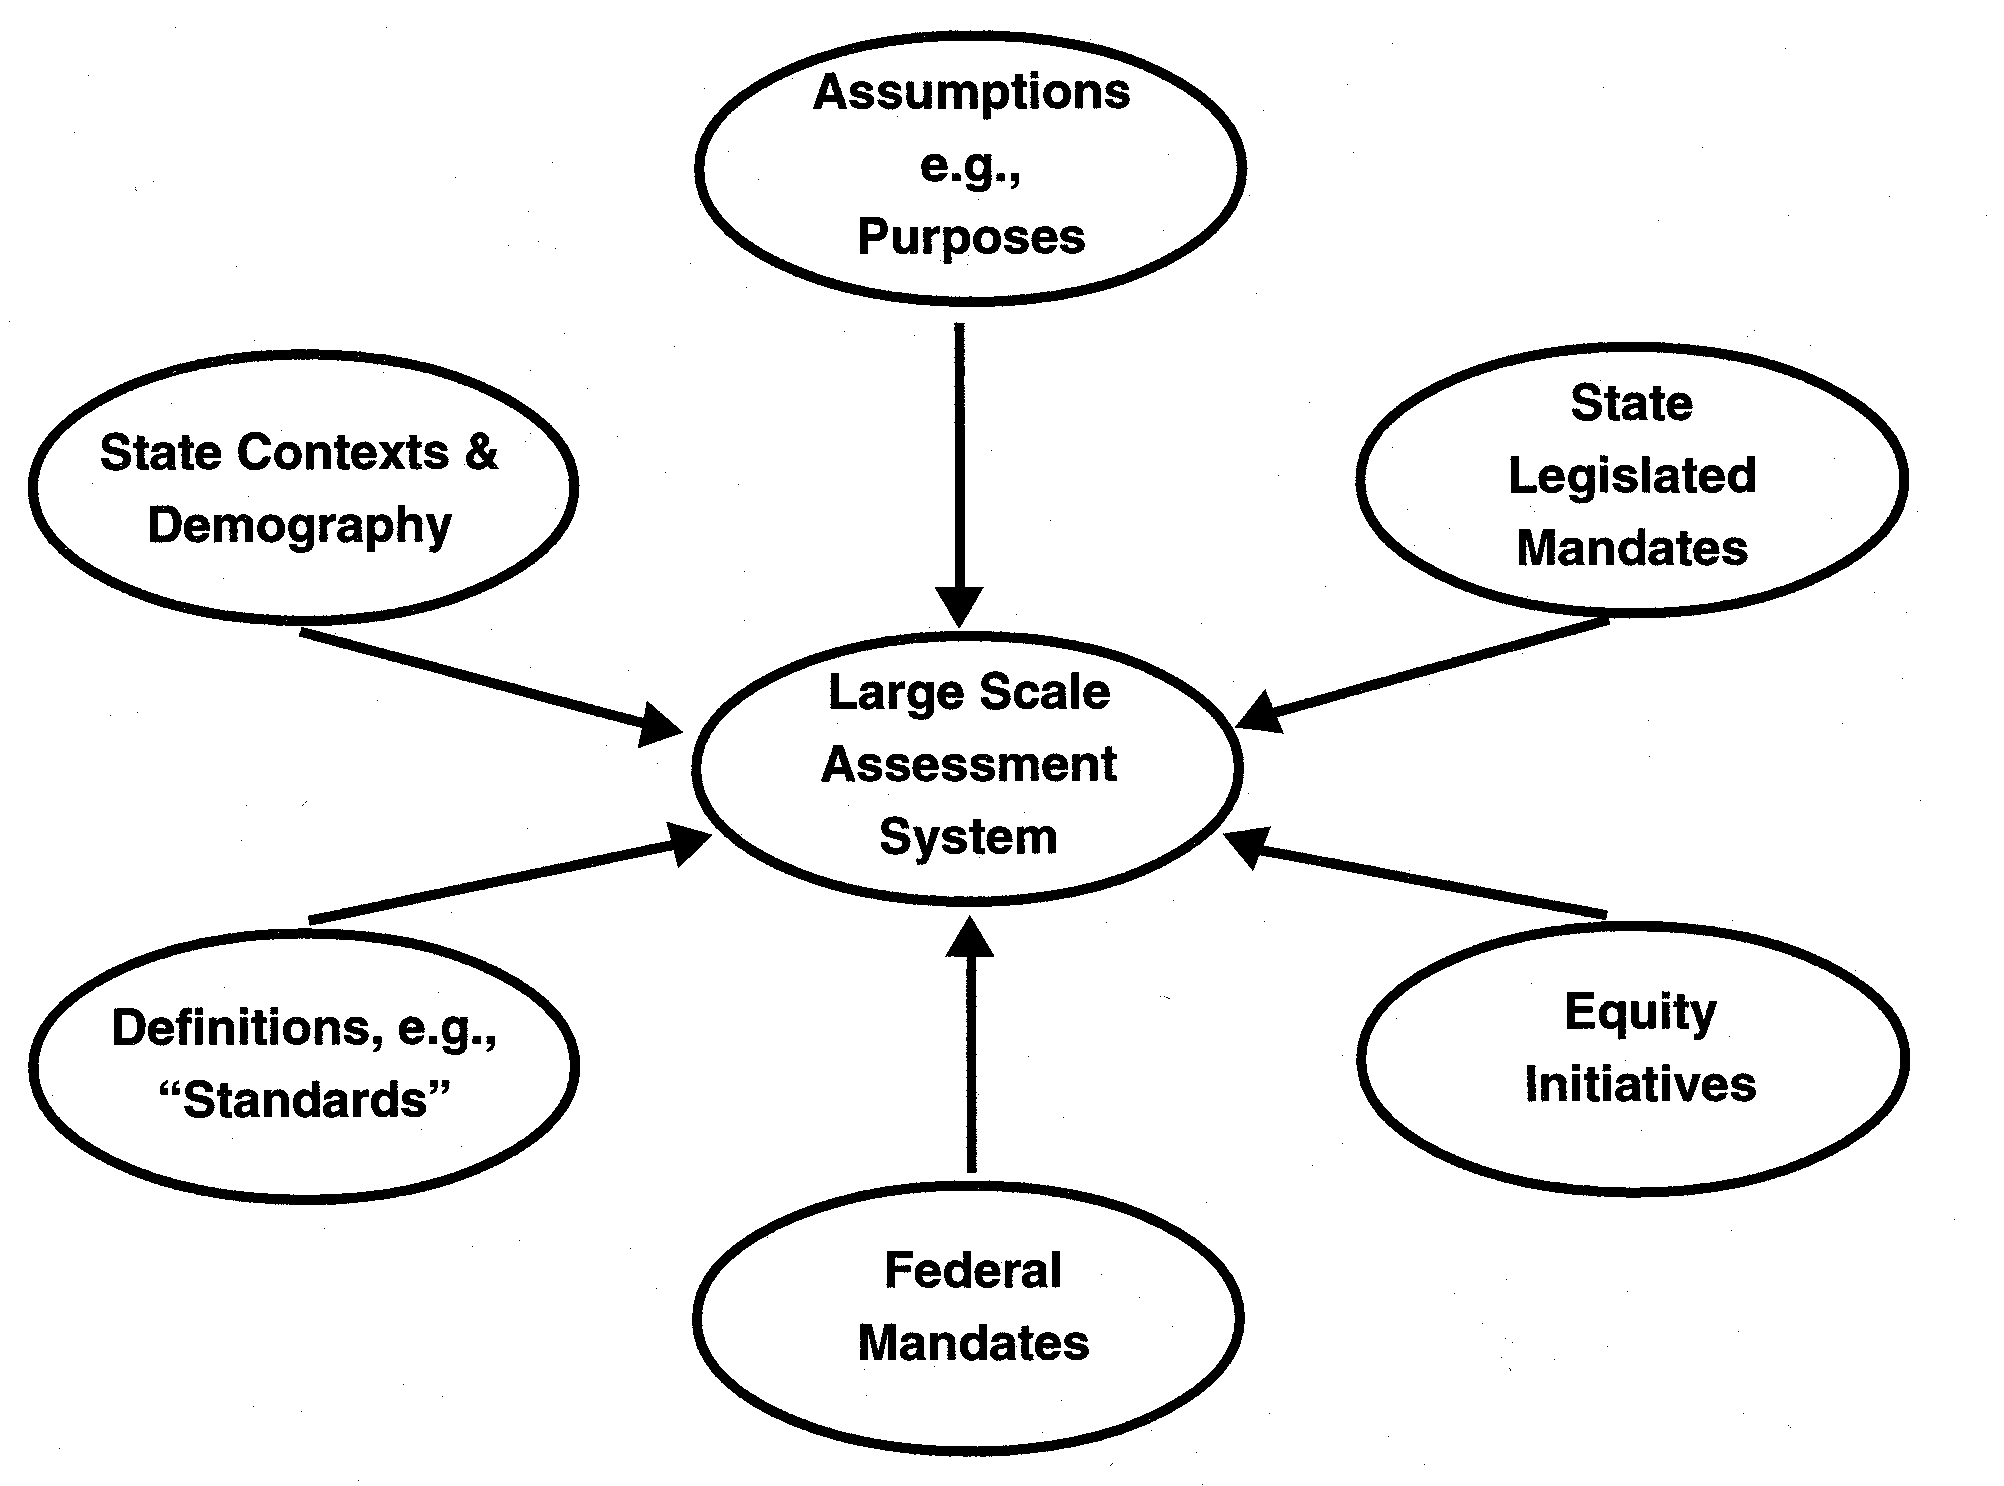 Forces that Shape Large-Scale Assessment Programs